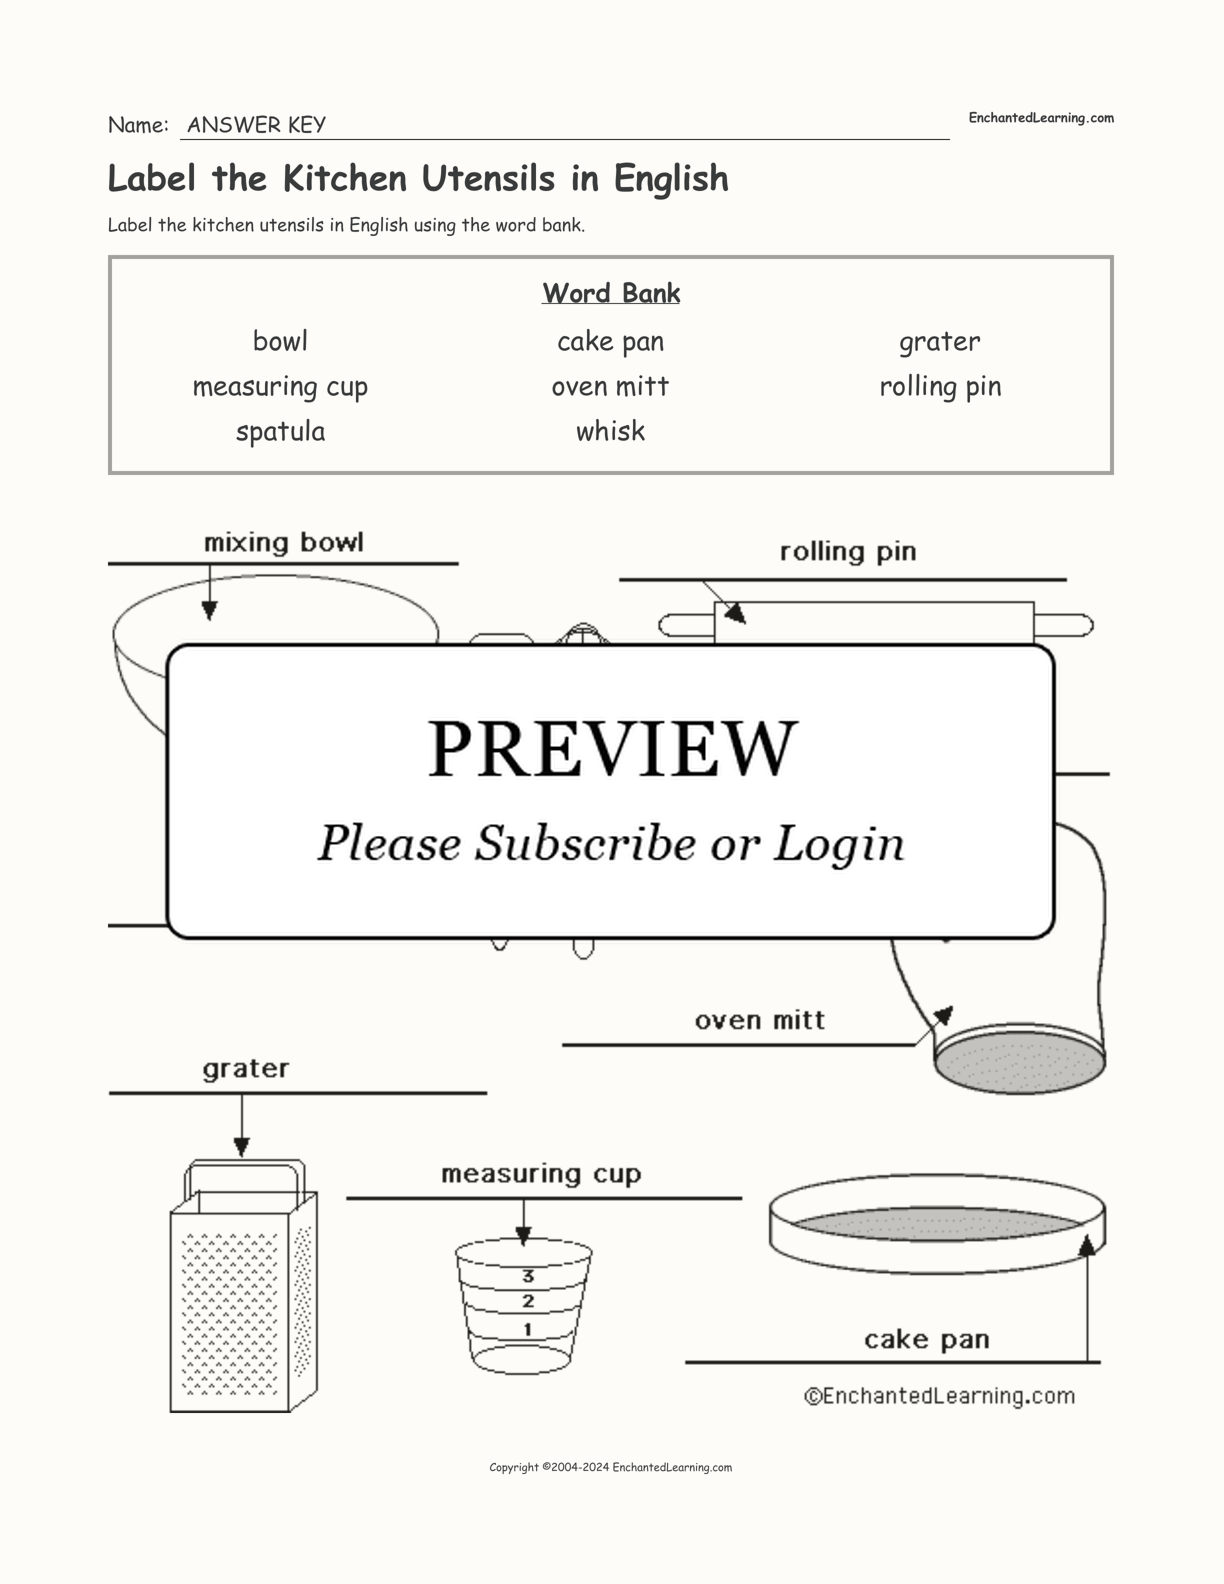 Label the Kitchen Utensils in English interactive worksheet page 2